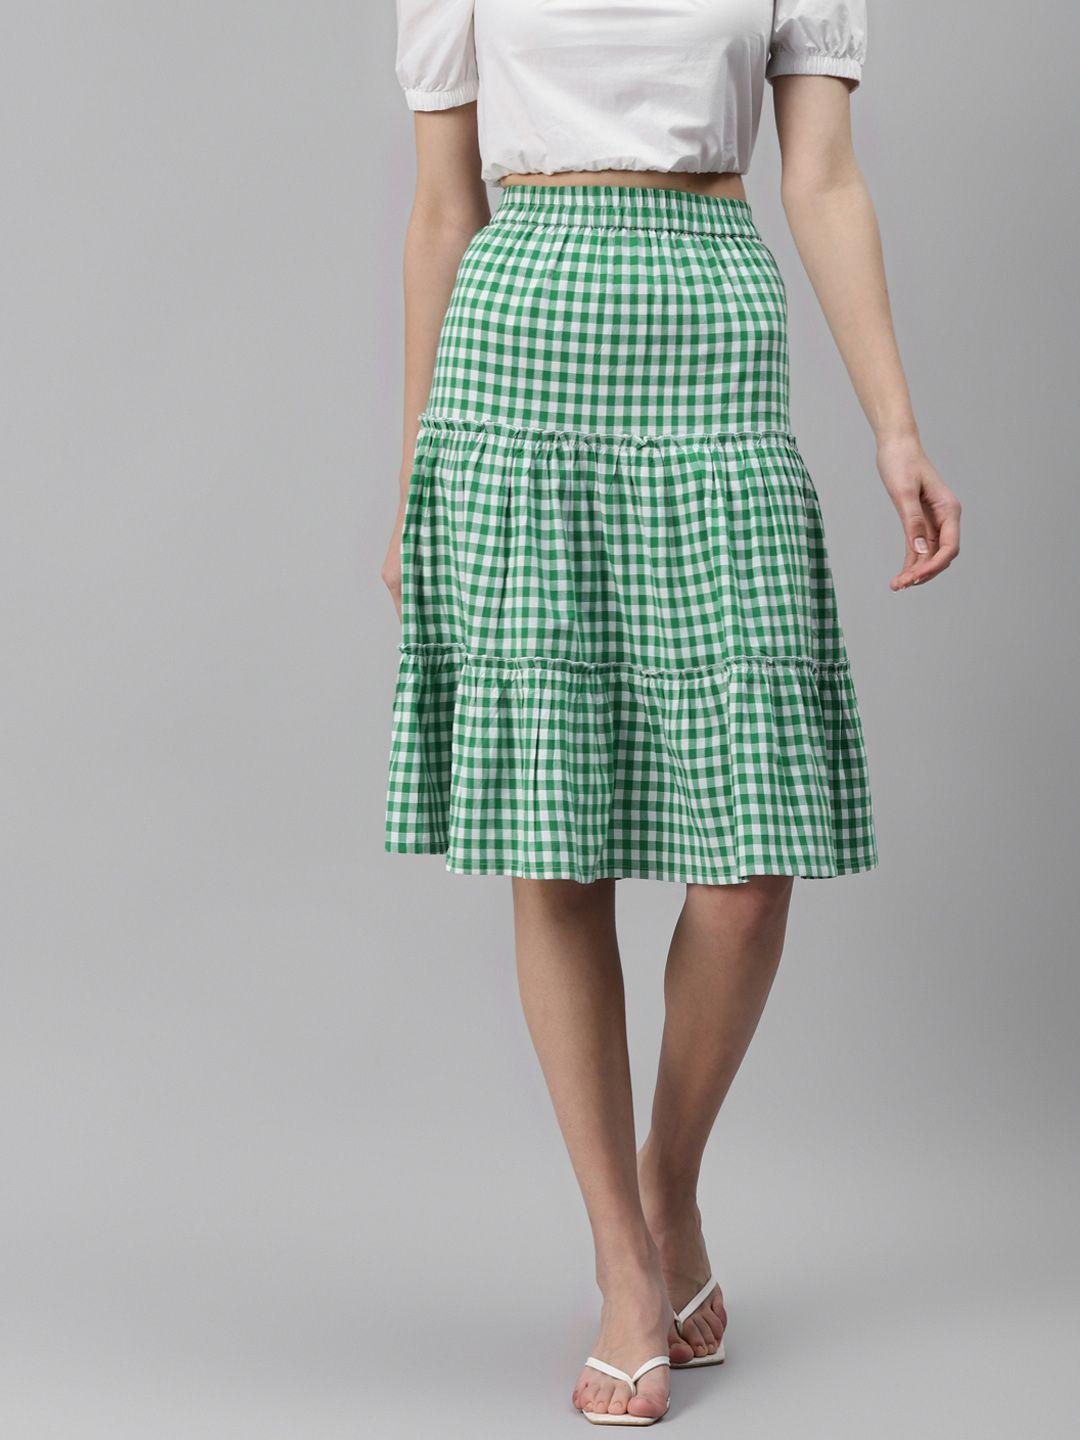 fabnest green & white gingham checks pleated ruffles casual flared tiered skirt